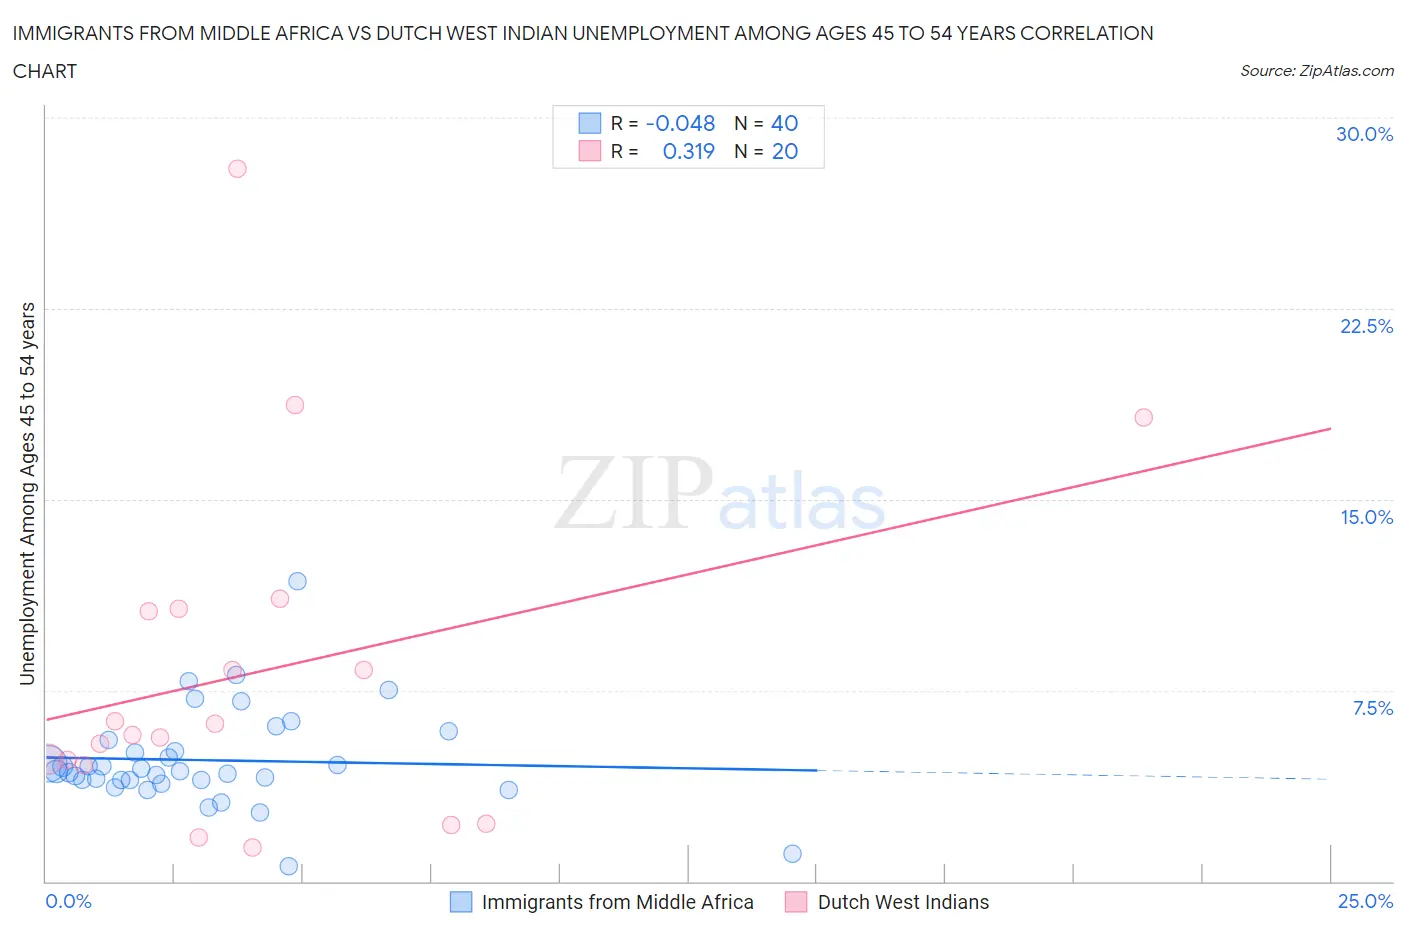 Immigrants from Middle Africa vs Dutch West Indian Unemployment Among Ages 45 to 54 years